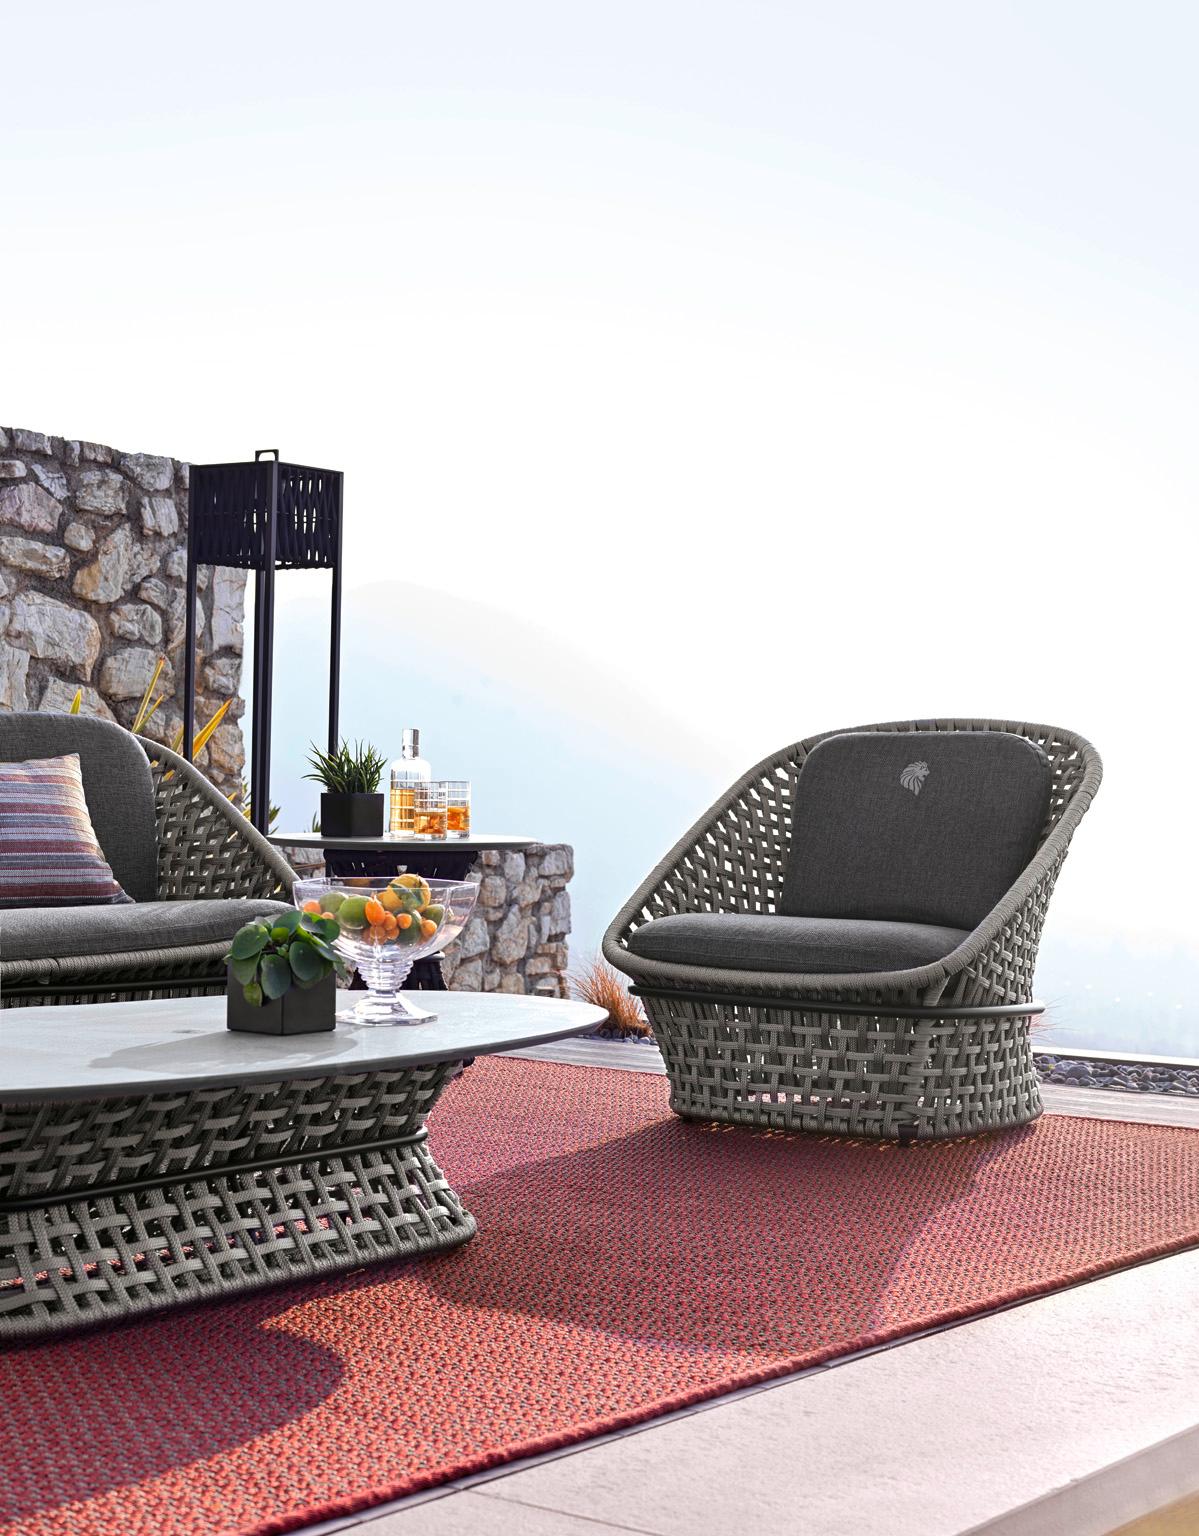 Giorgio Collection Dune Outdoor occasional chair in special treated fabric.
Cushion filling in waterproof dacron. Structure in combination of
satined black metal treated in cataphoresis with inserted Giorgio
Collection logo and light grey woven